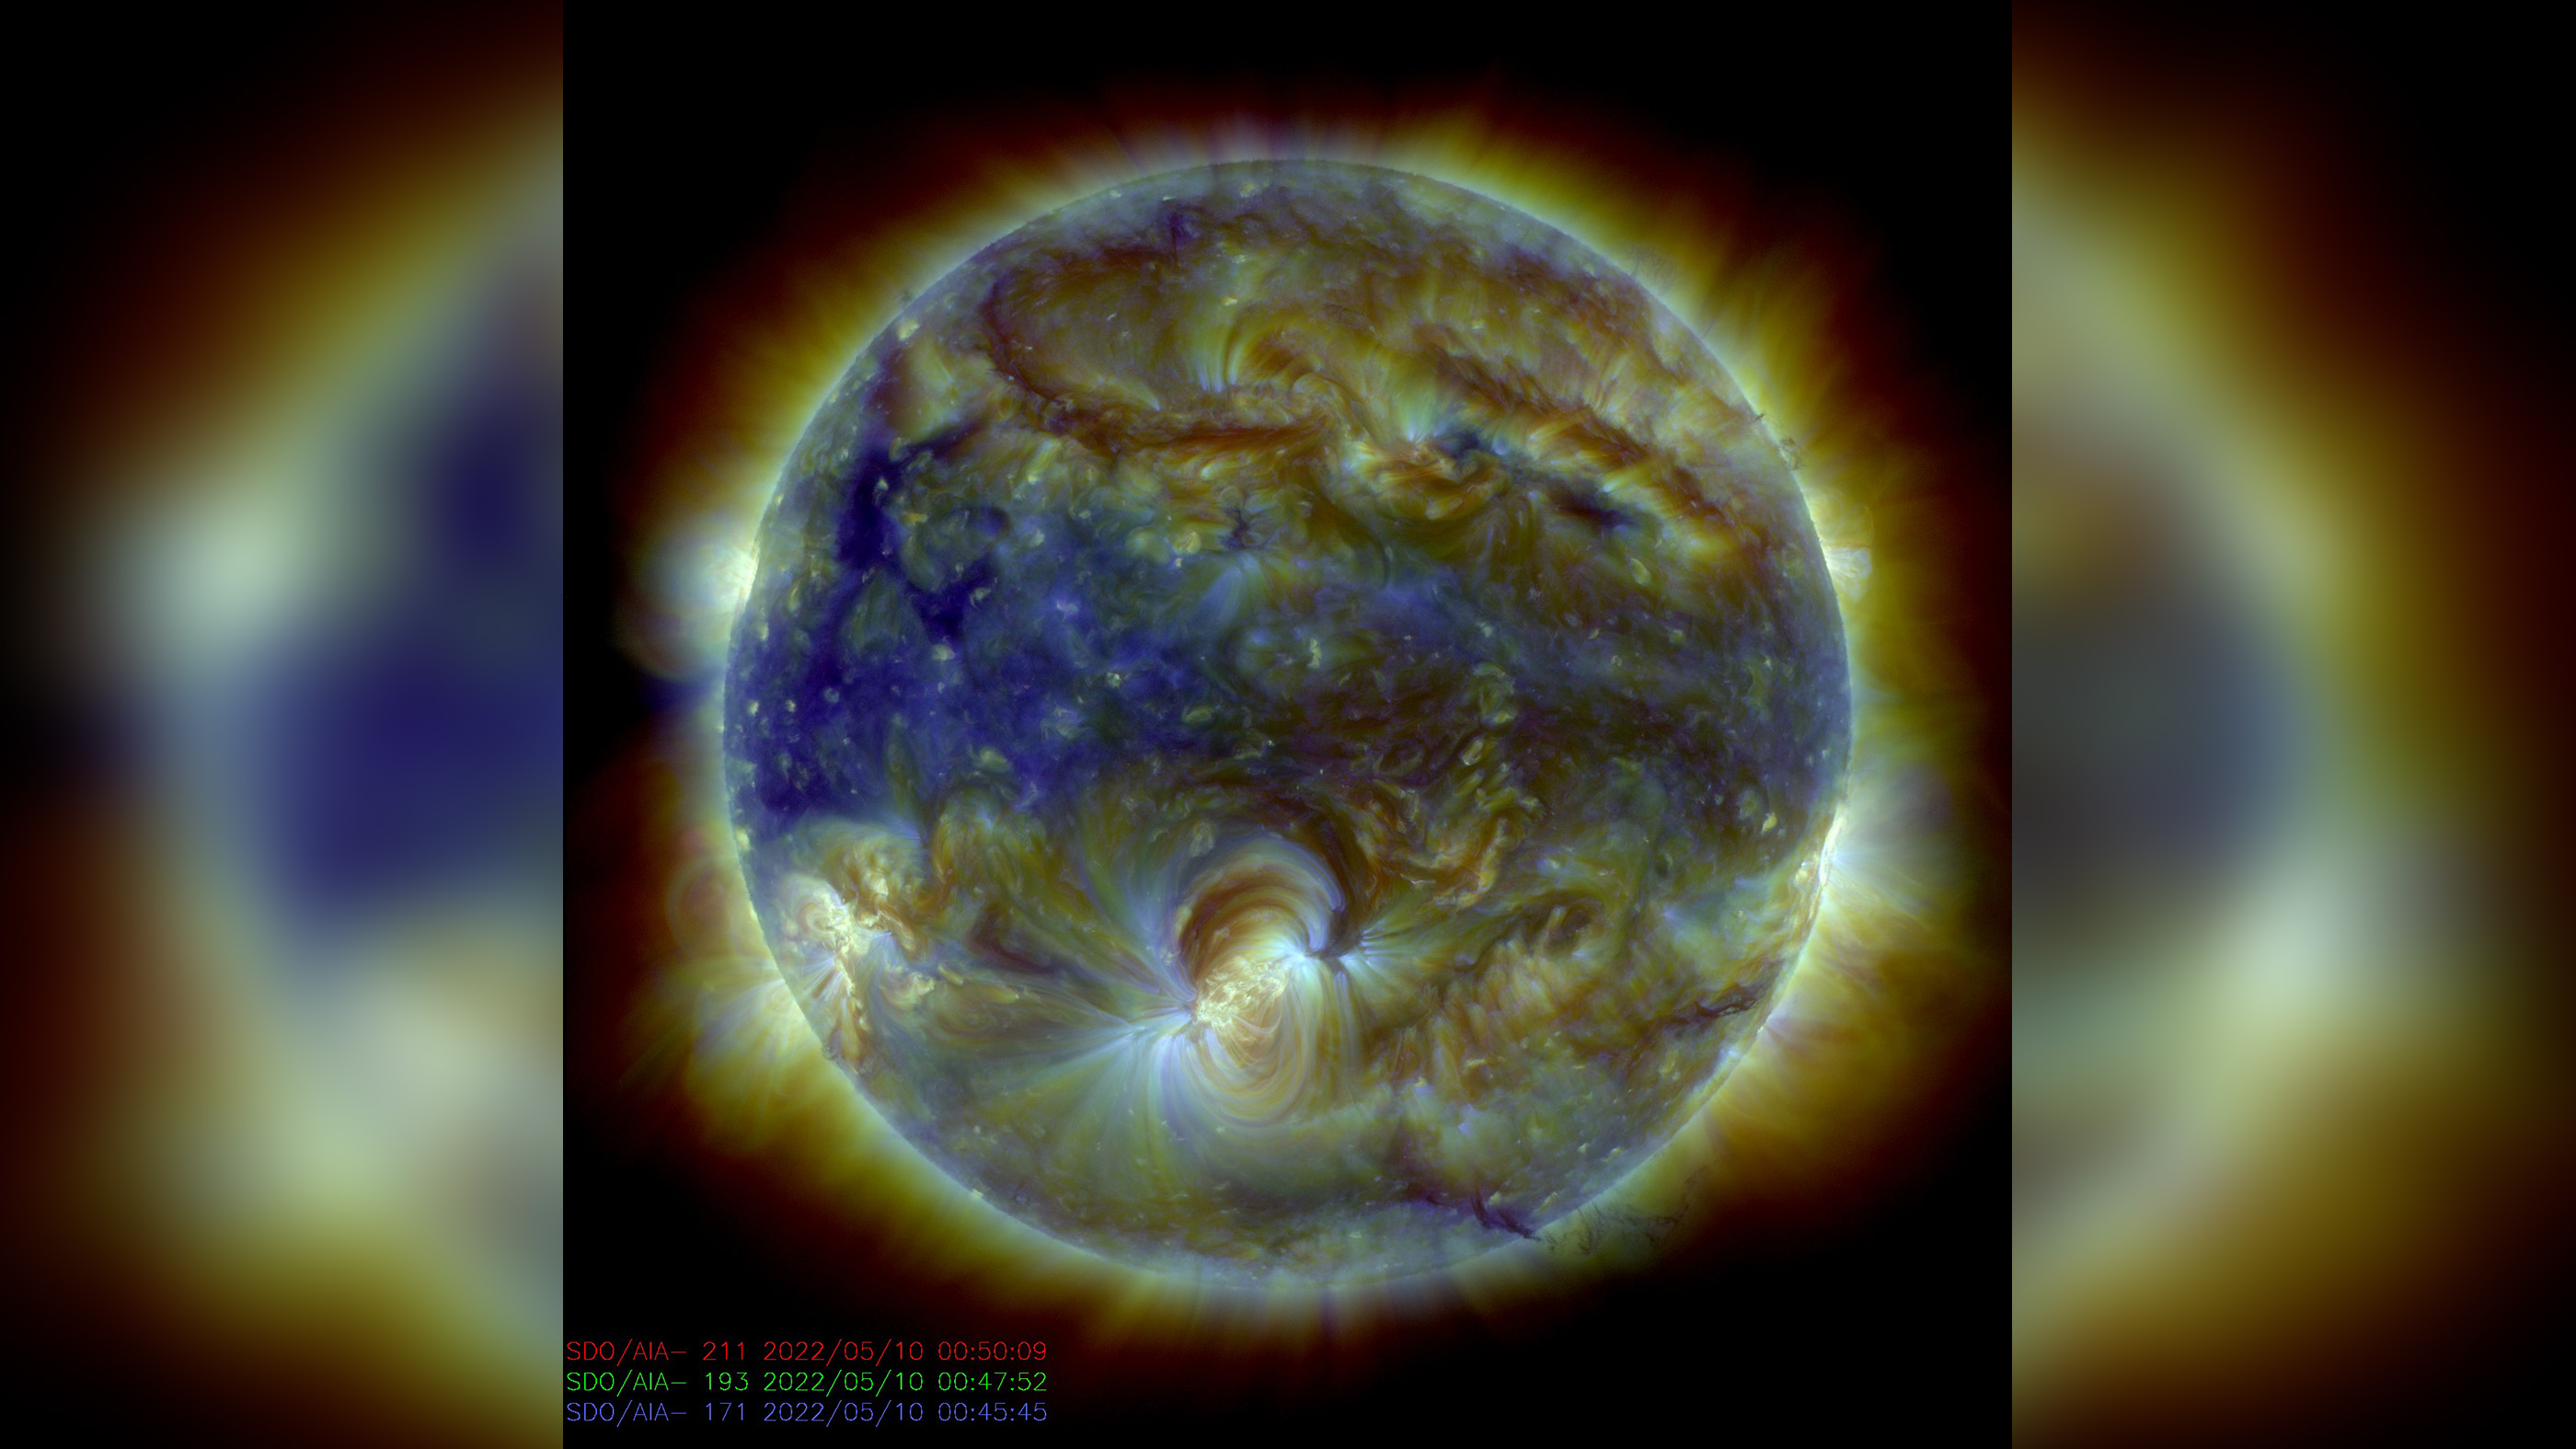 NASA's Solar Dynamics Observatory captured this composite photo of the Sun around the same time the intense solar flare occurred. AR3006 is visible in the lower center of the solar disk.